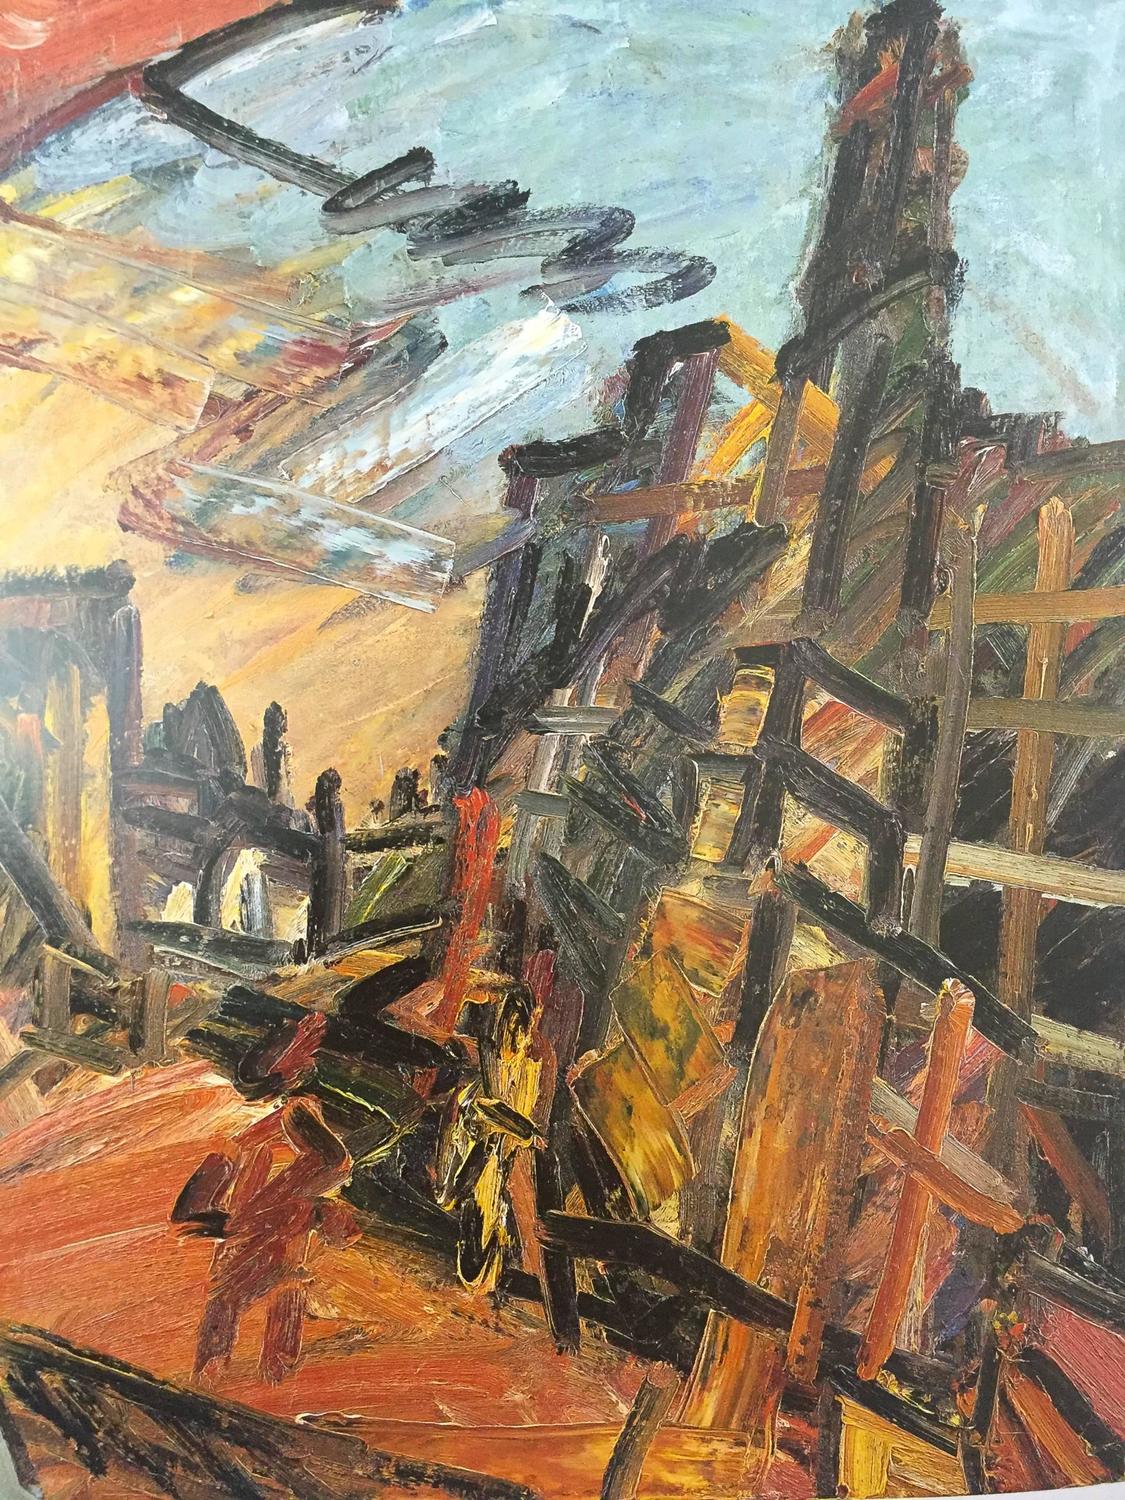 Frank Auerbach, William Feaver 'Signed by Auerbach' For Sale at 1stdibs